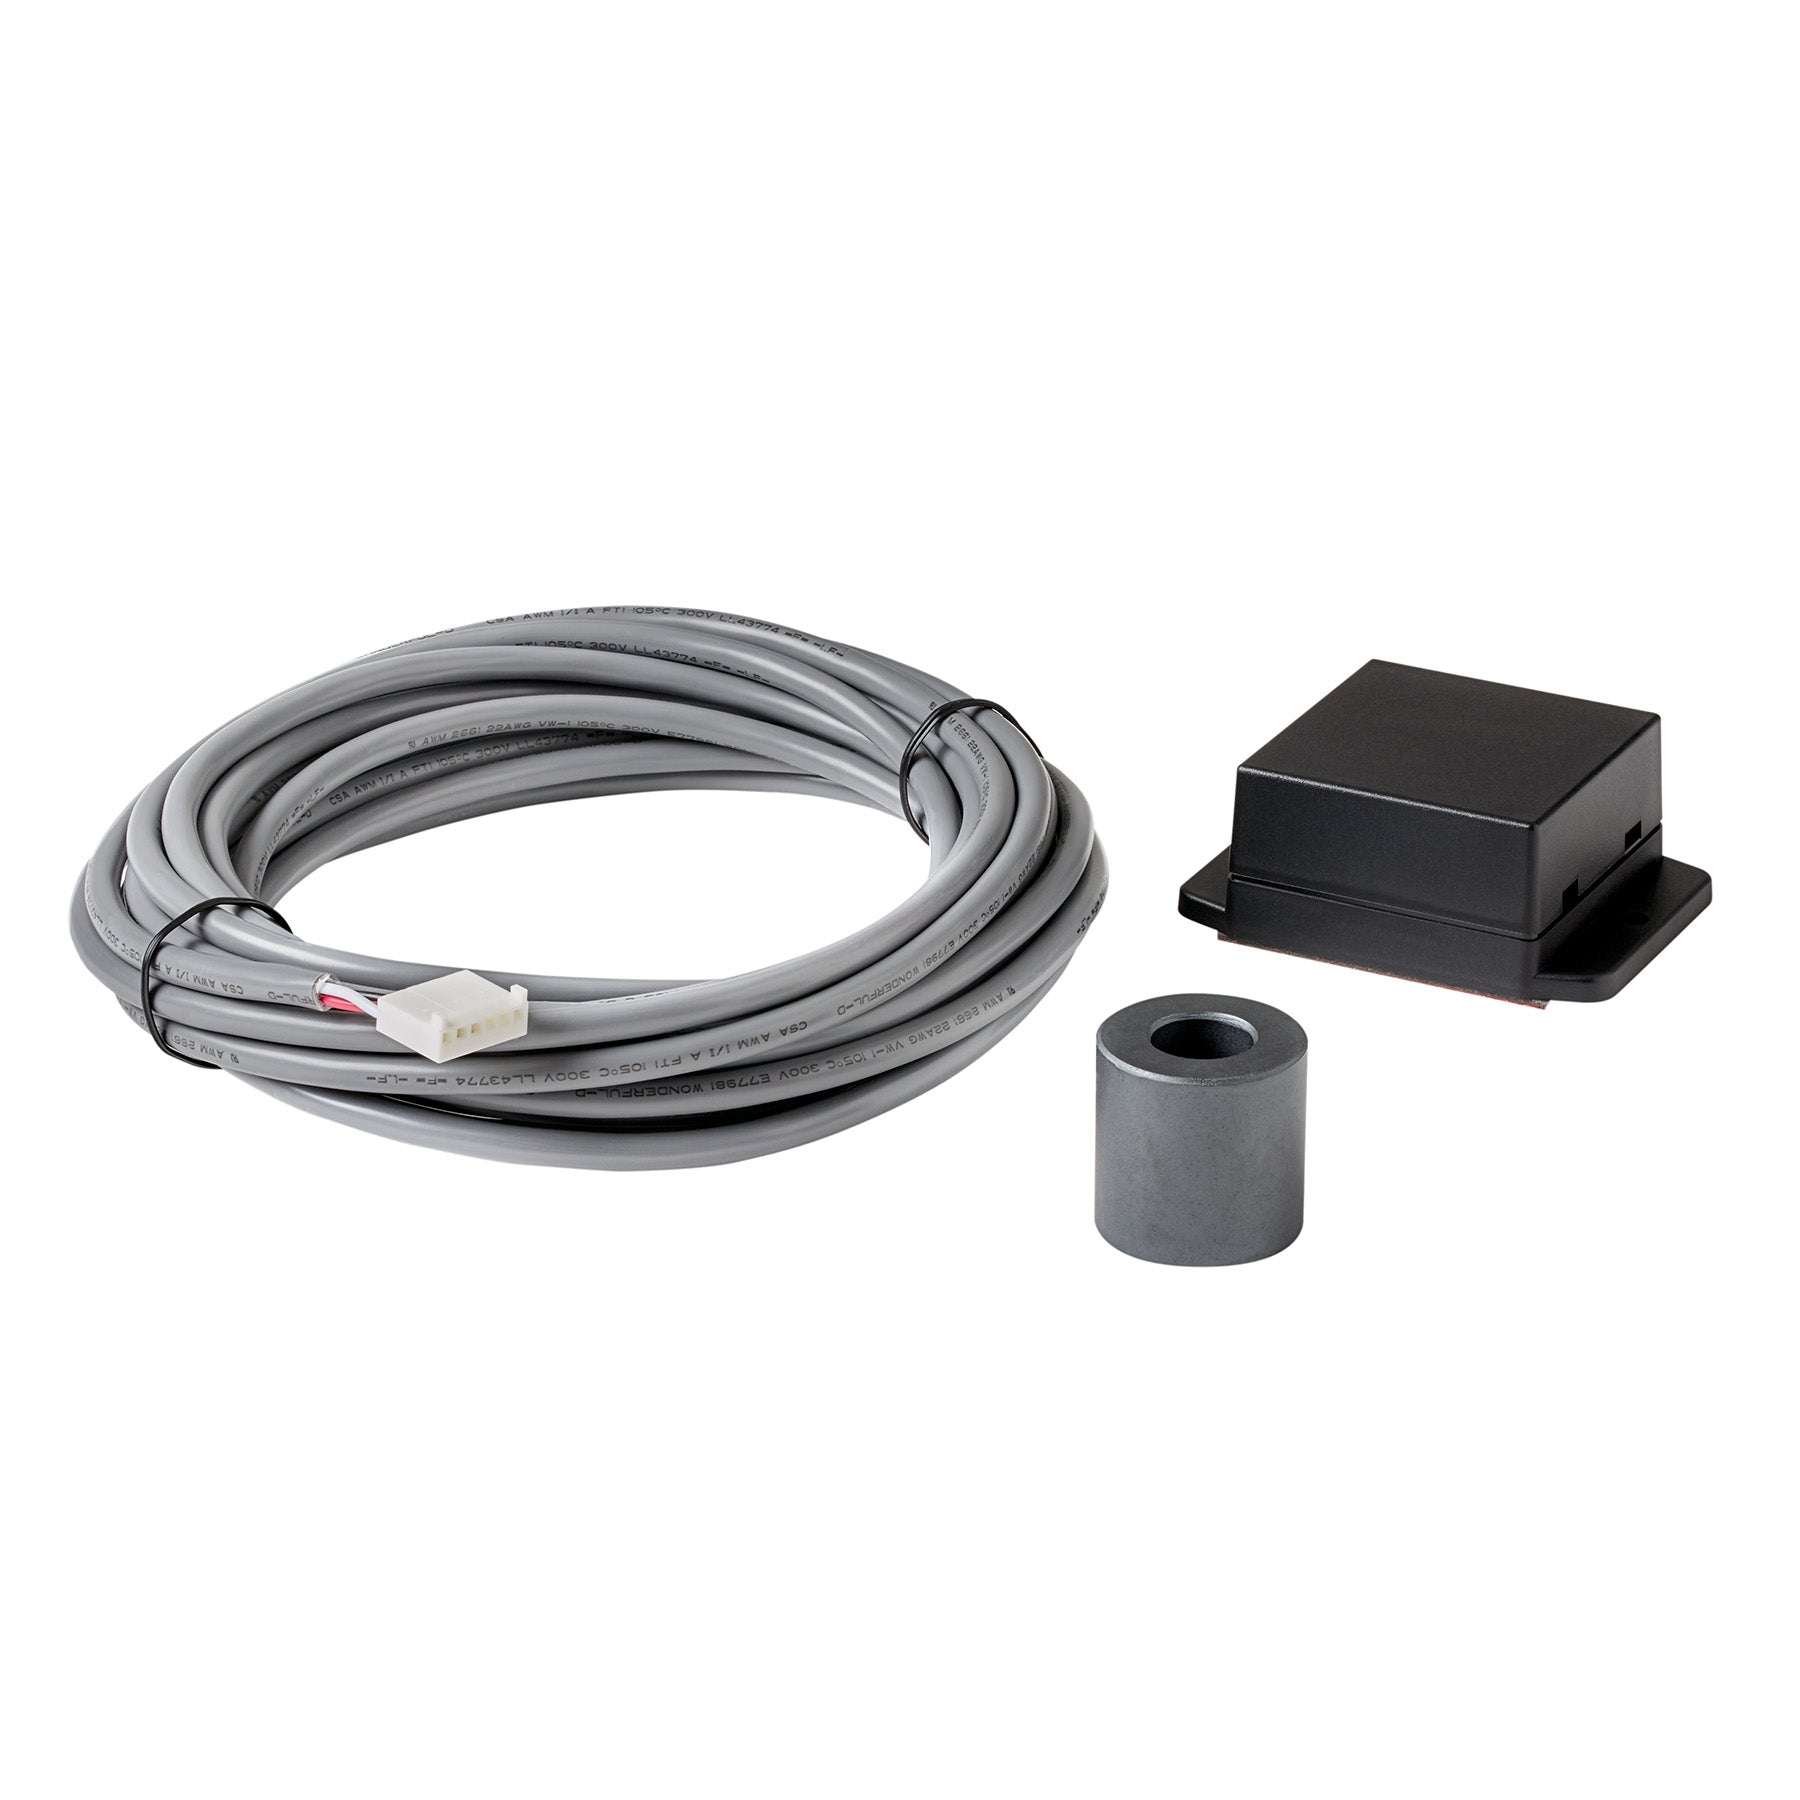 Broan - Low Voltage Wiring Kit Ventilation Accessory in Stainless - HAWRK3